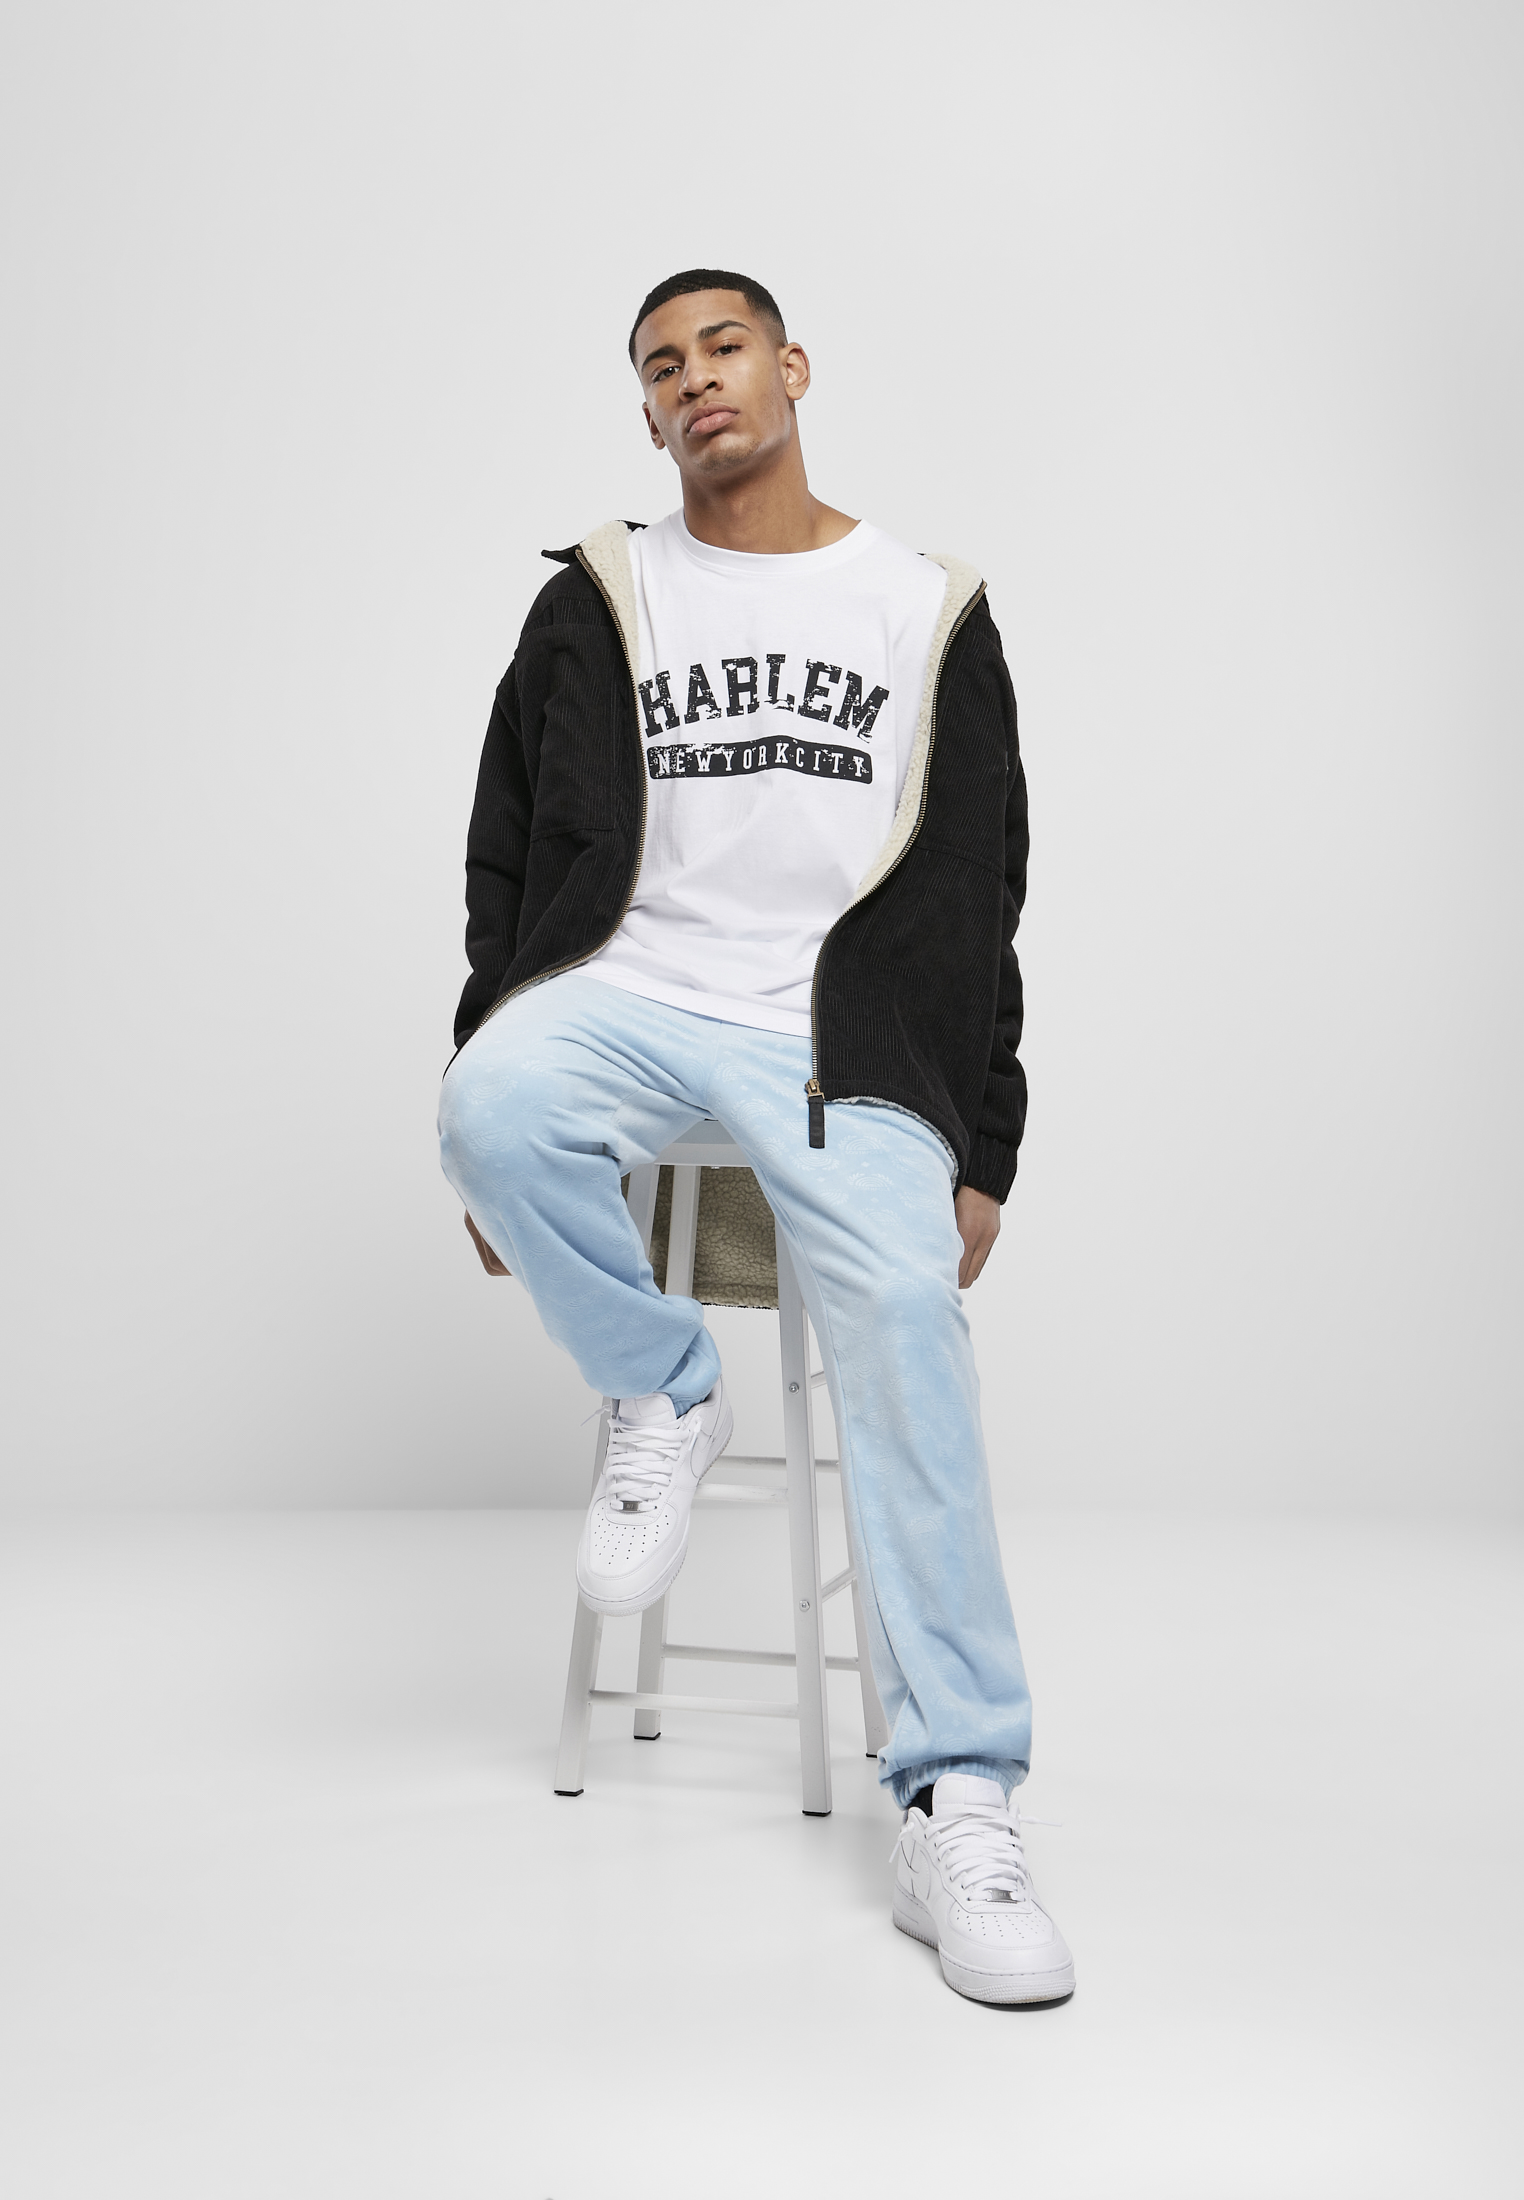 Saisonware Southpole Harlem Tee in Farbe white